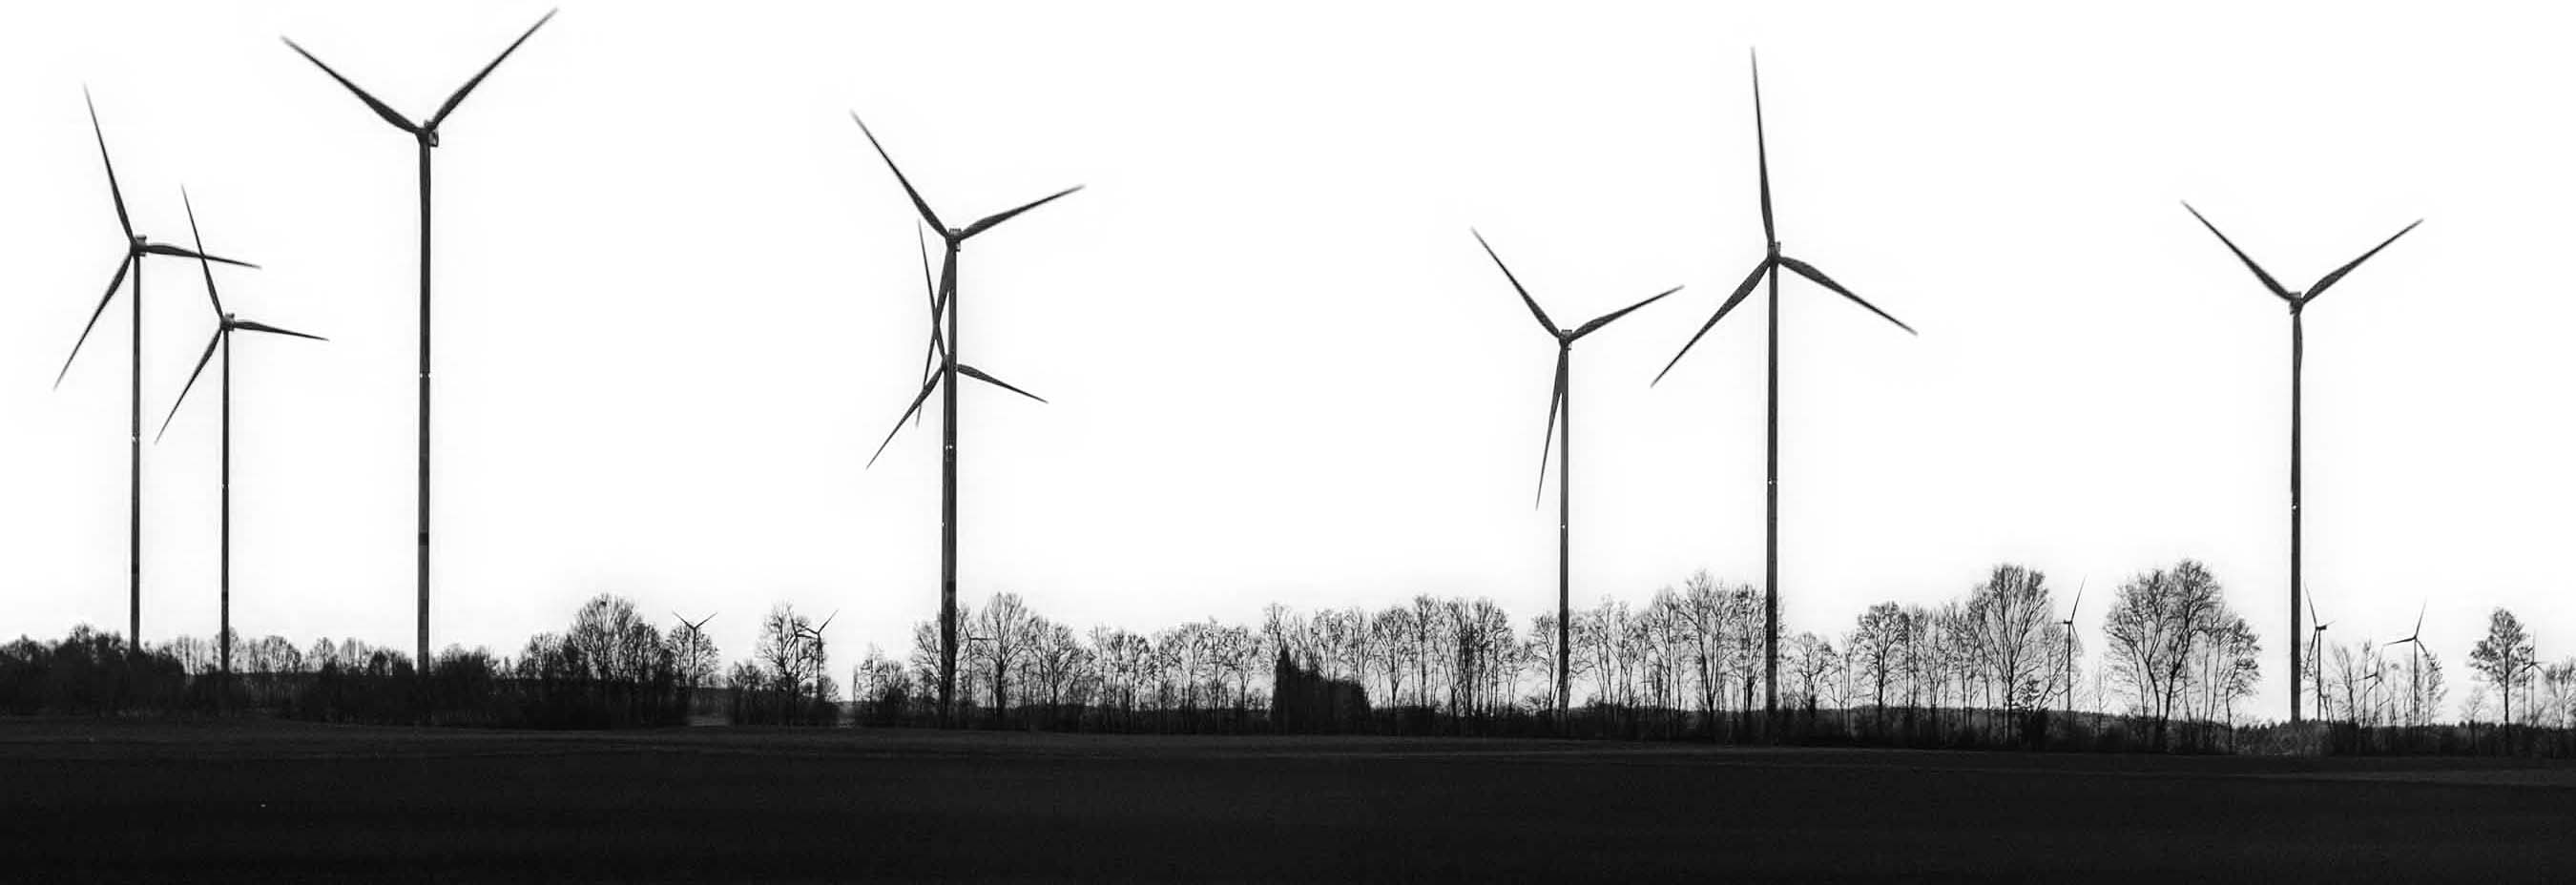 background image with wind turbines